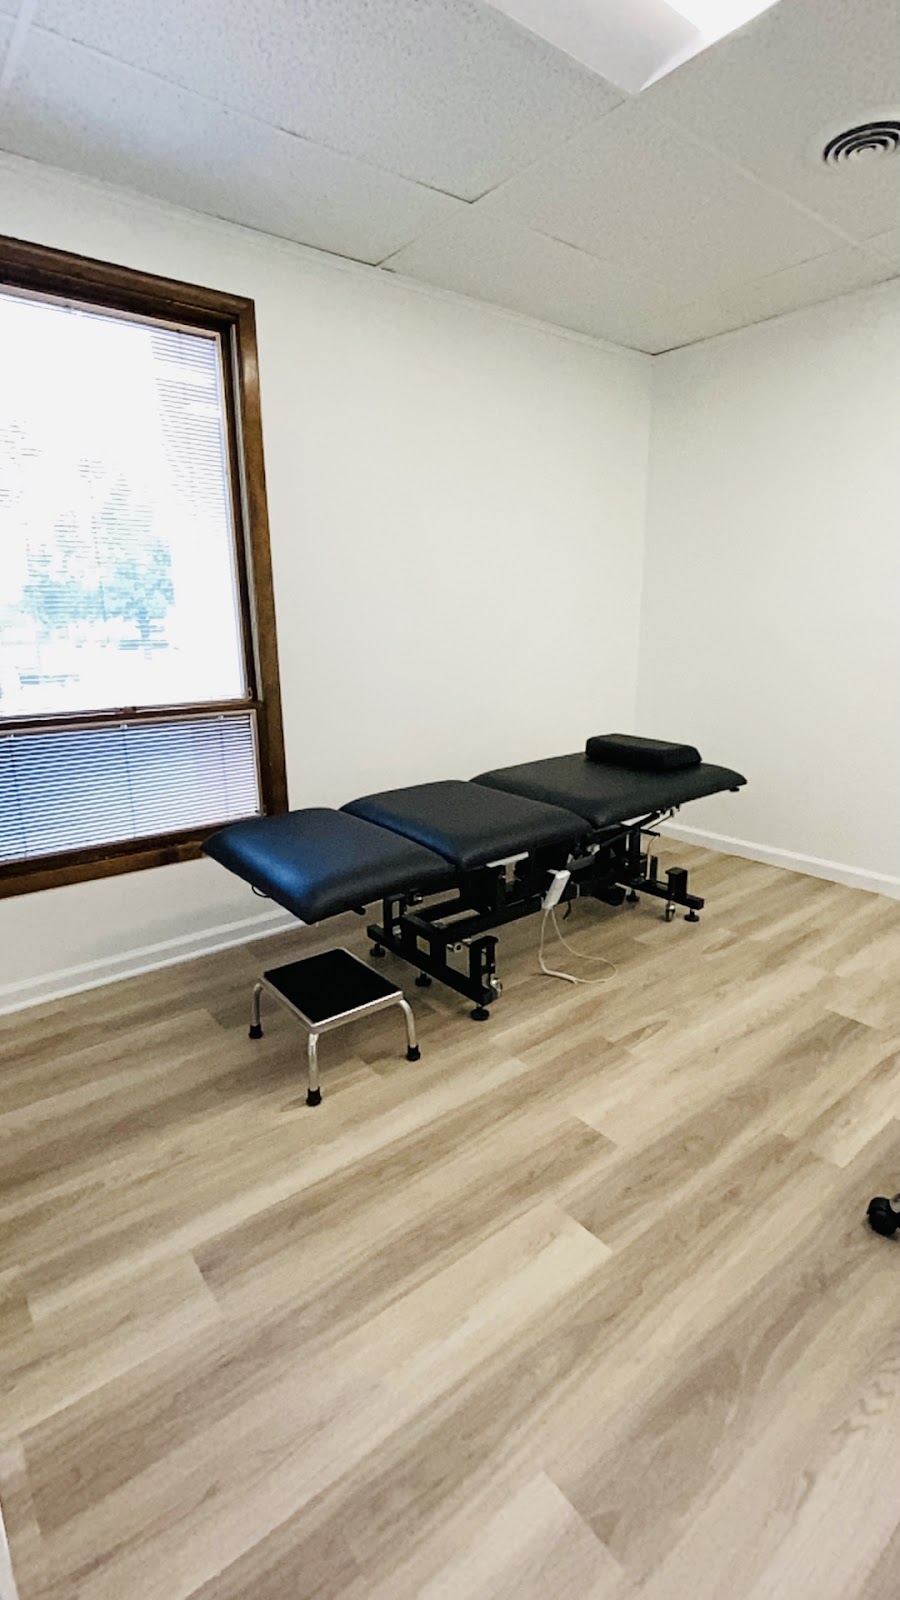 Spineck Physical Therapy | 646 NJ-18 Suite 110, Building B, East Brunswick, NJ 08816, USA | Phone: (551) 208-3234